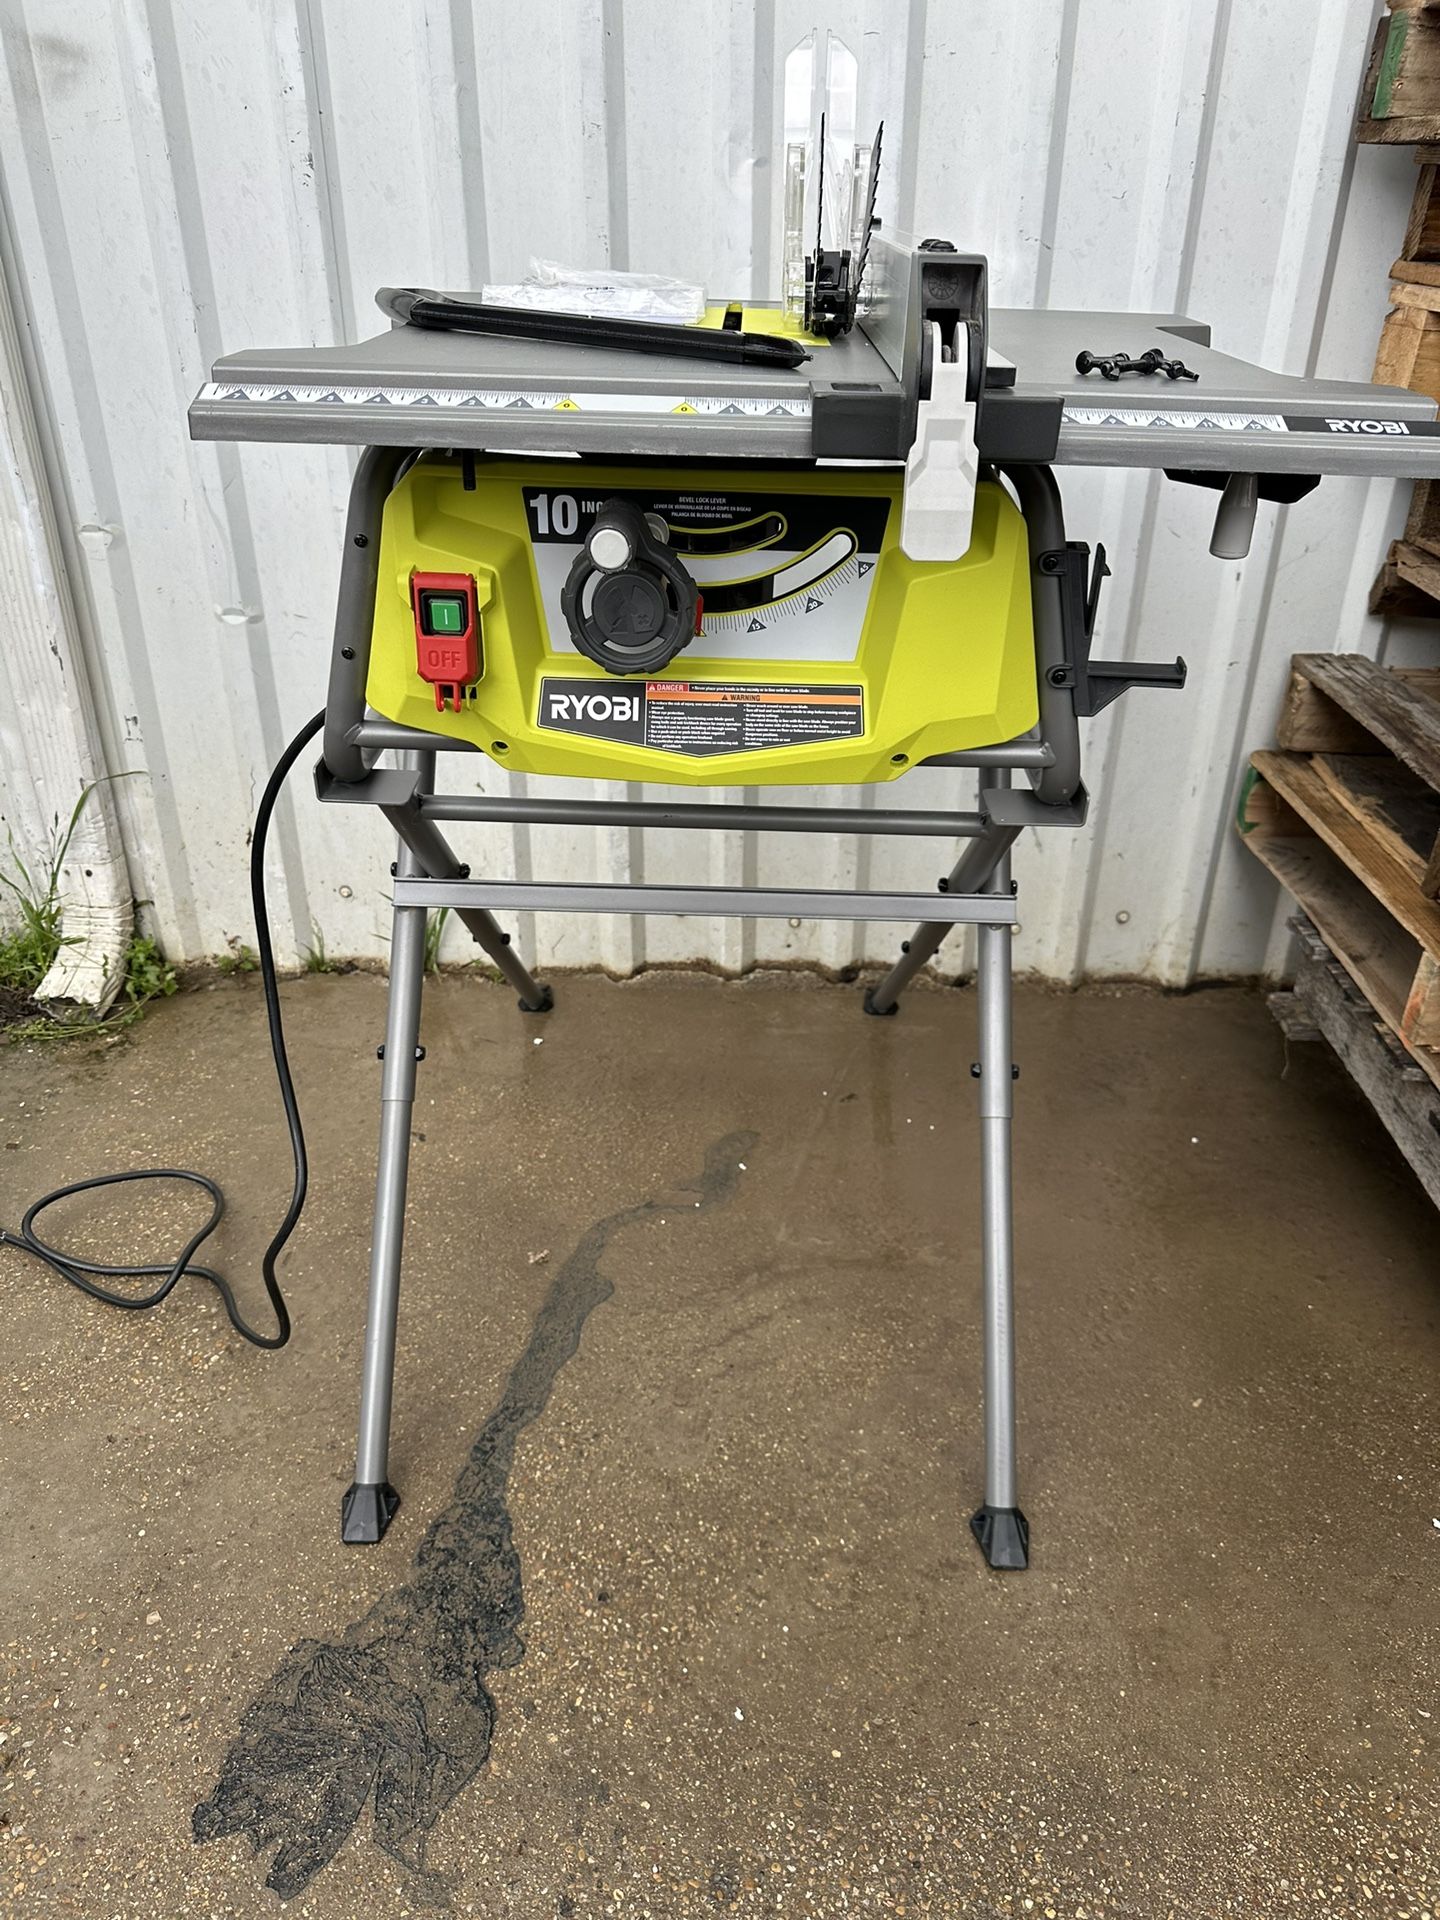 RYOBI 15 Amp 10 in. Compact Portable Corded Jobsite Table Saw with Folding Stand USED $175